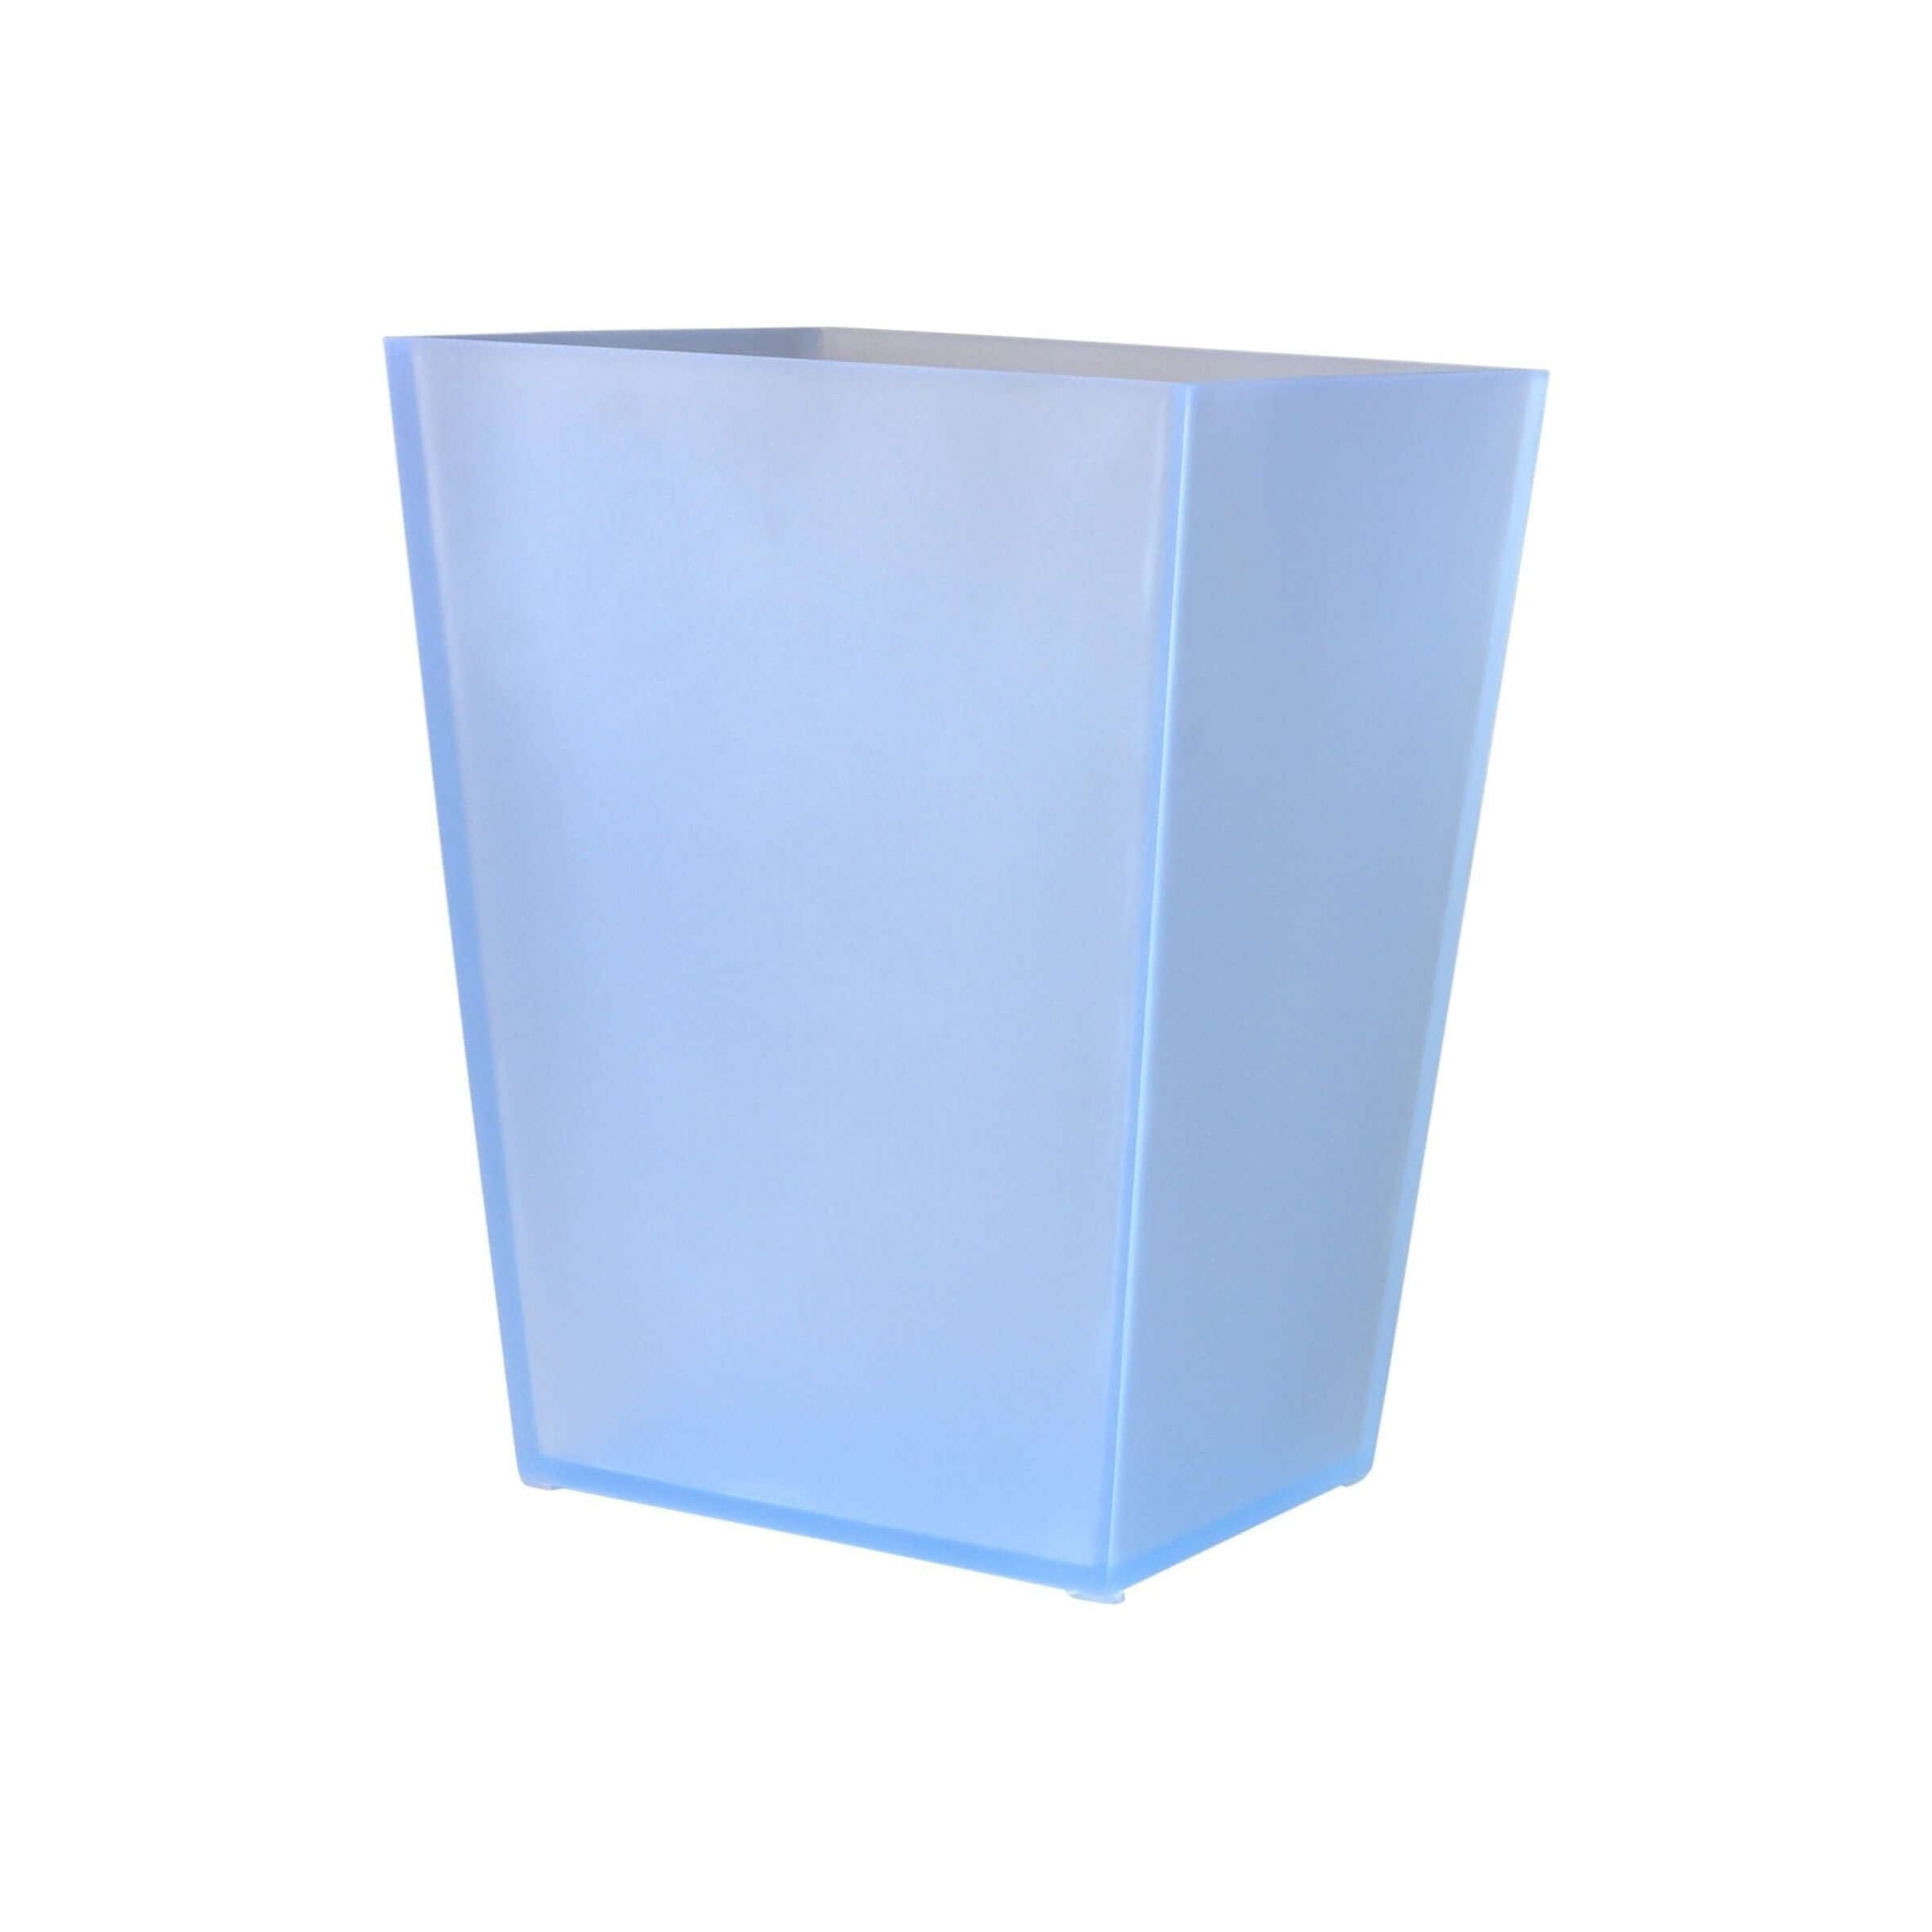 Mike + Ally - Ice Frosted Sky Wastebasket - 31462 - Blue - 